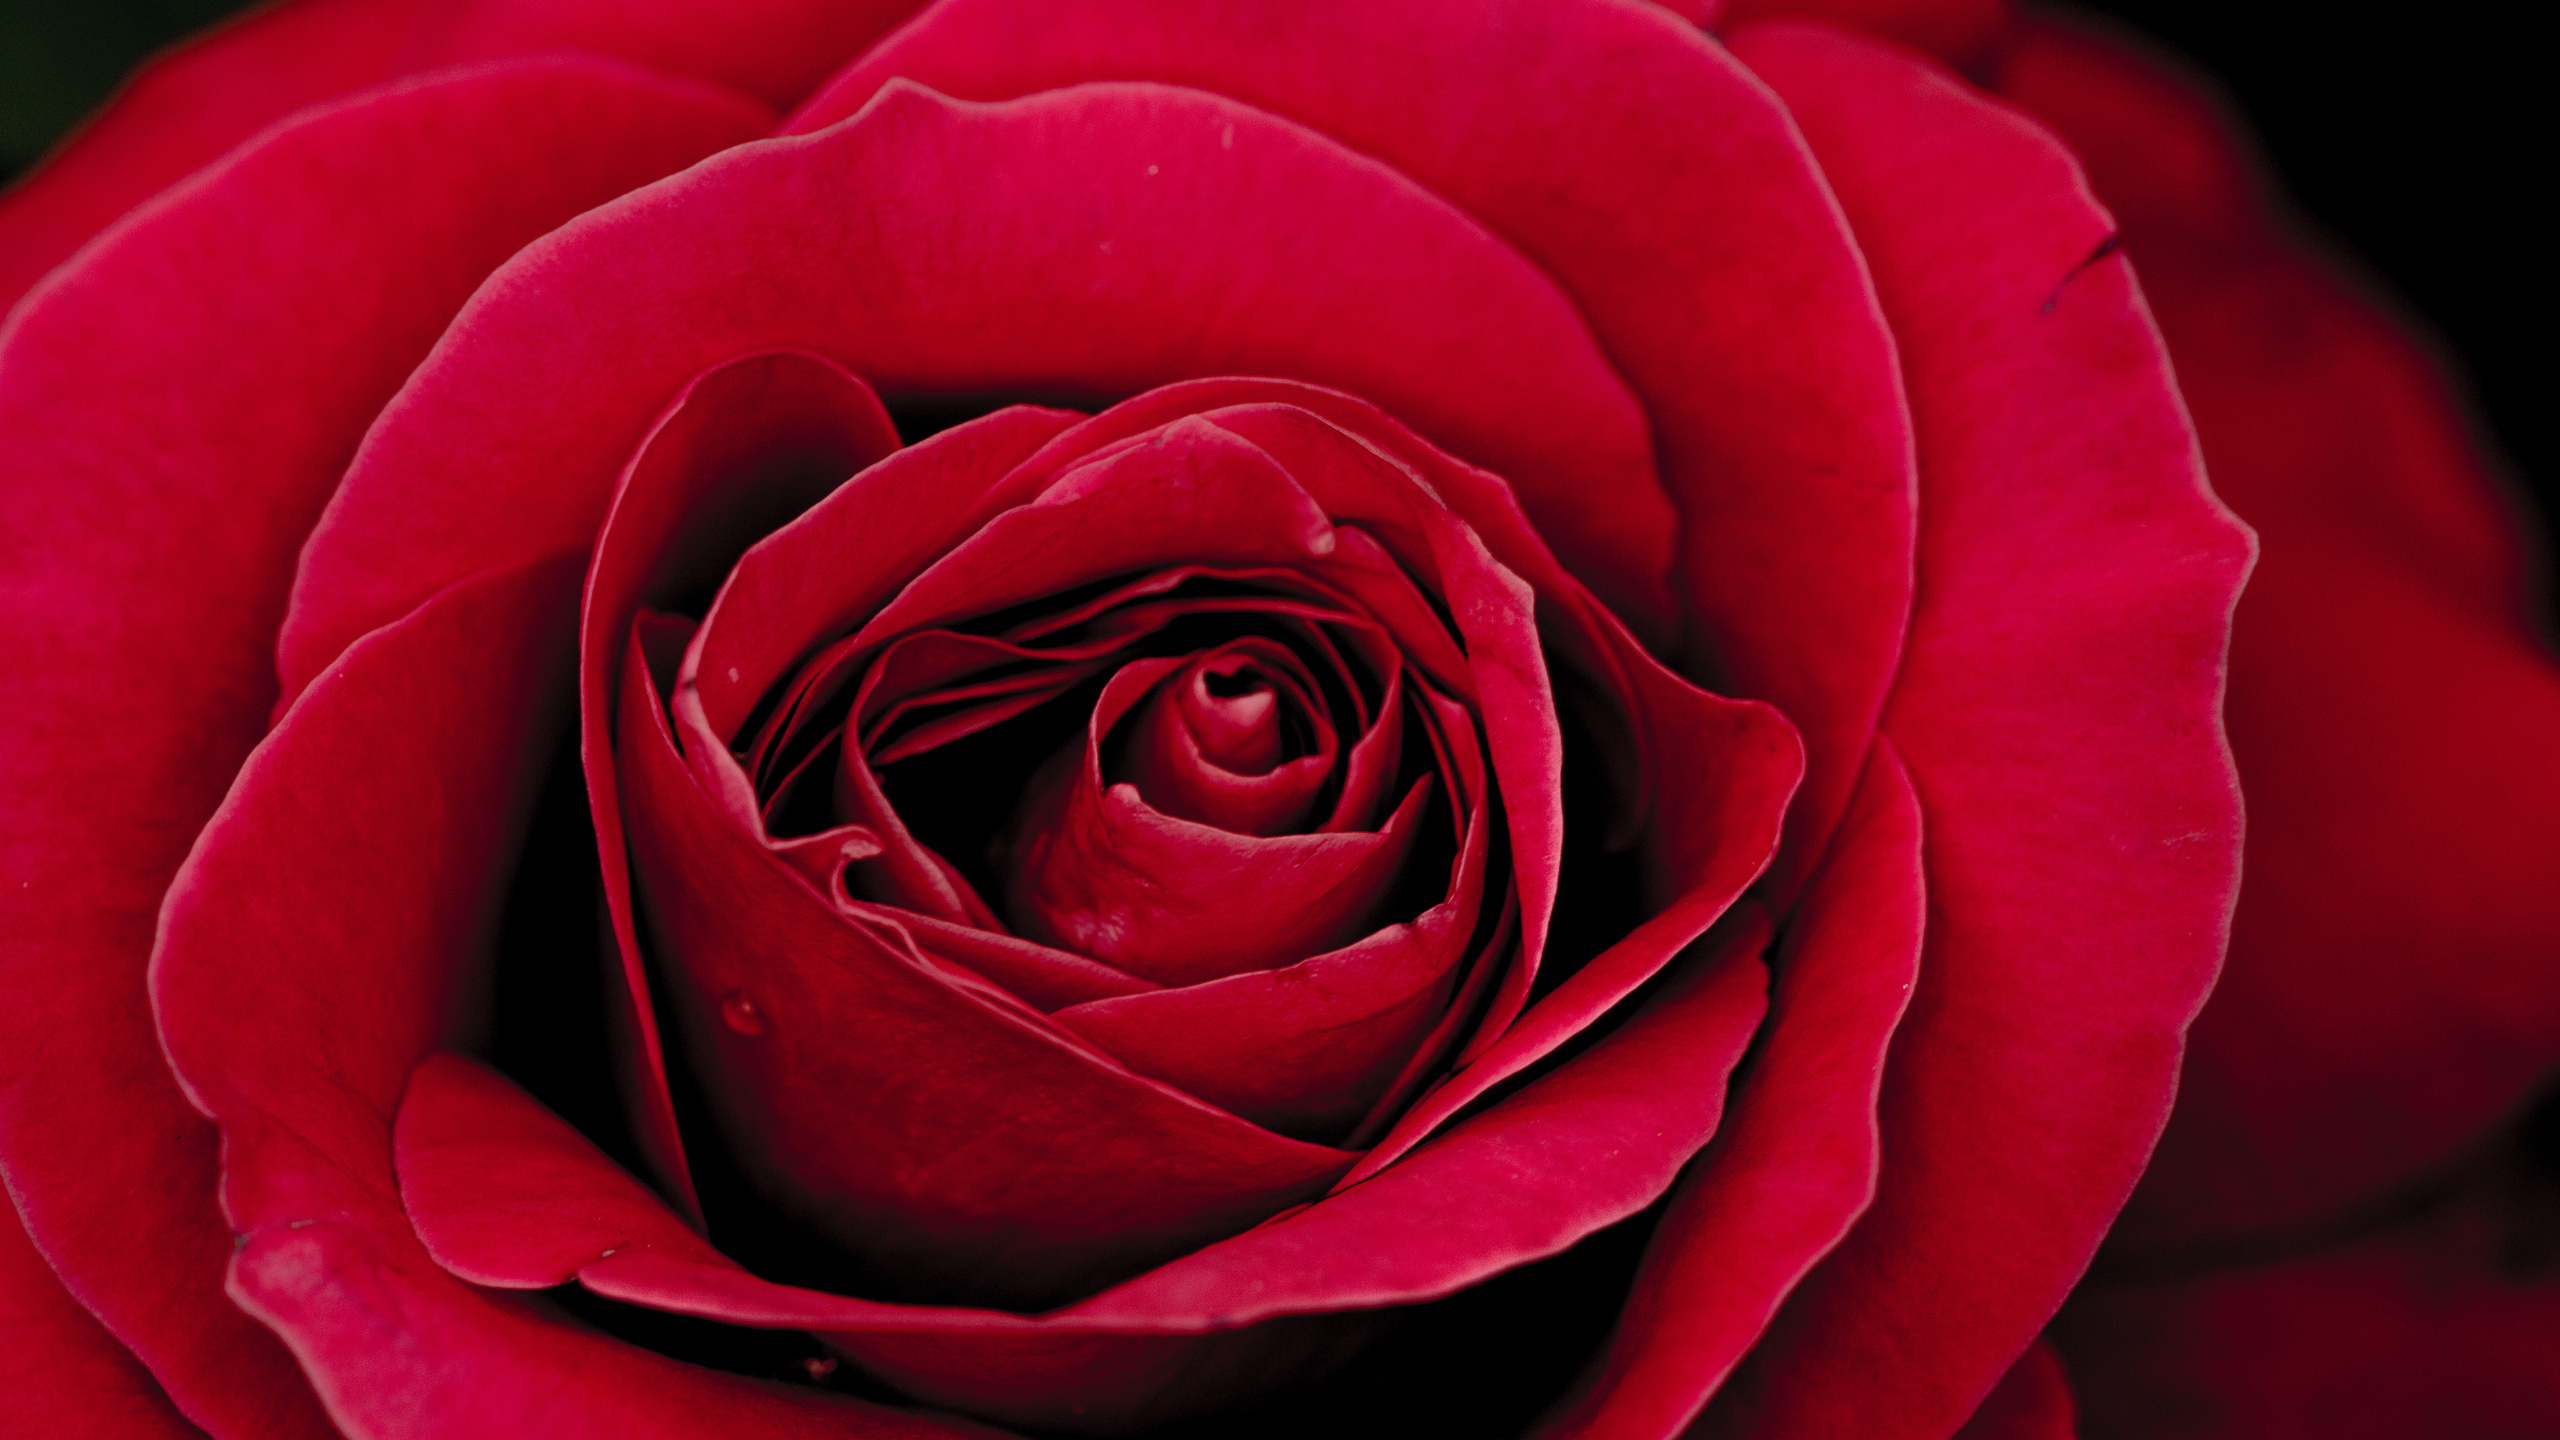 Red Rose in Bloom Close up Photo. Wallpaper in 2560x1440 Resolution